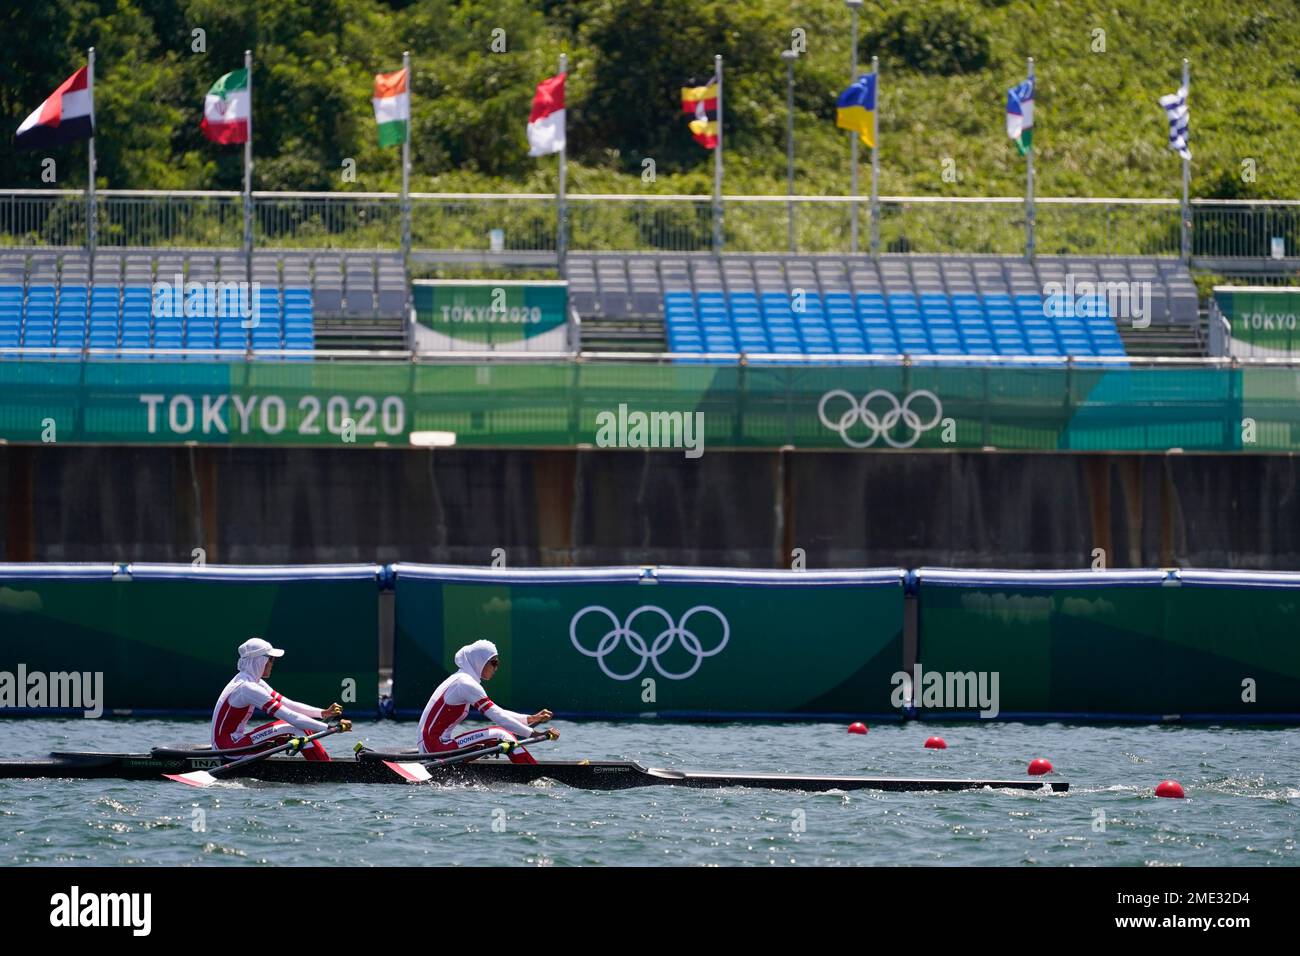 Mutiara Putri and Melania Putri of Indonesia compete in the lightweight  women's rowing double sculls final